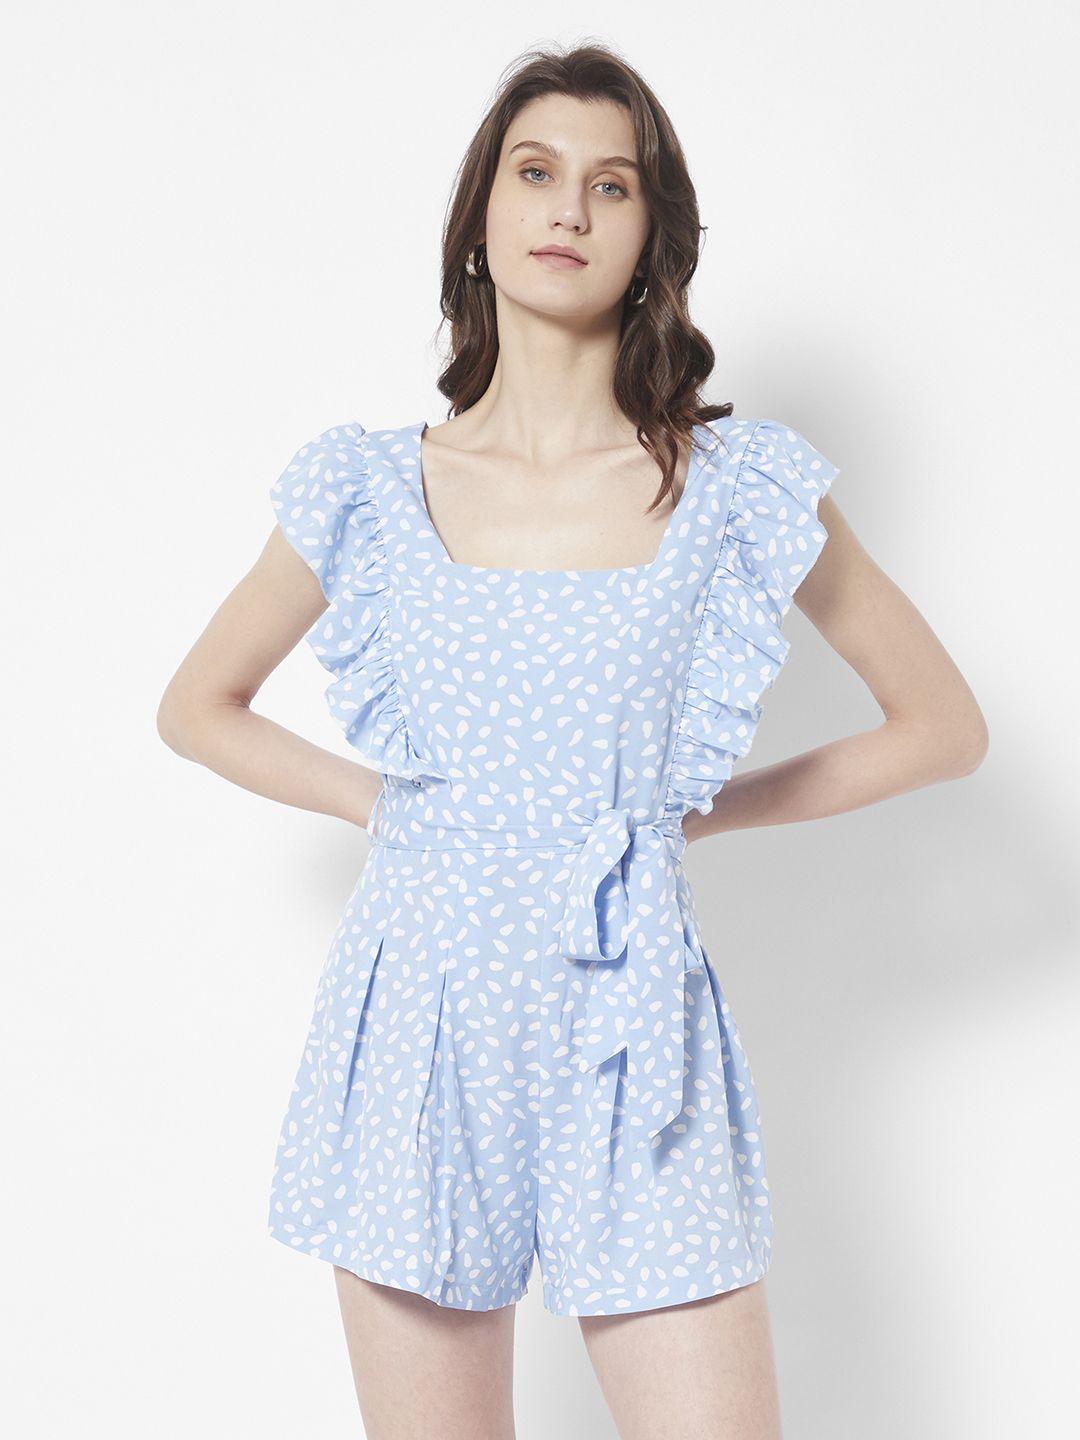 urbanic blue & white abstract printed with ruffles playsuit comes with a belt